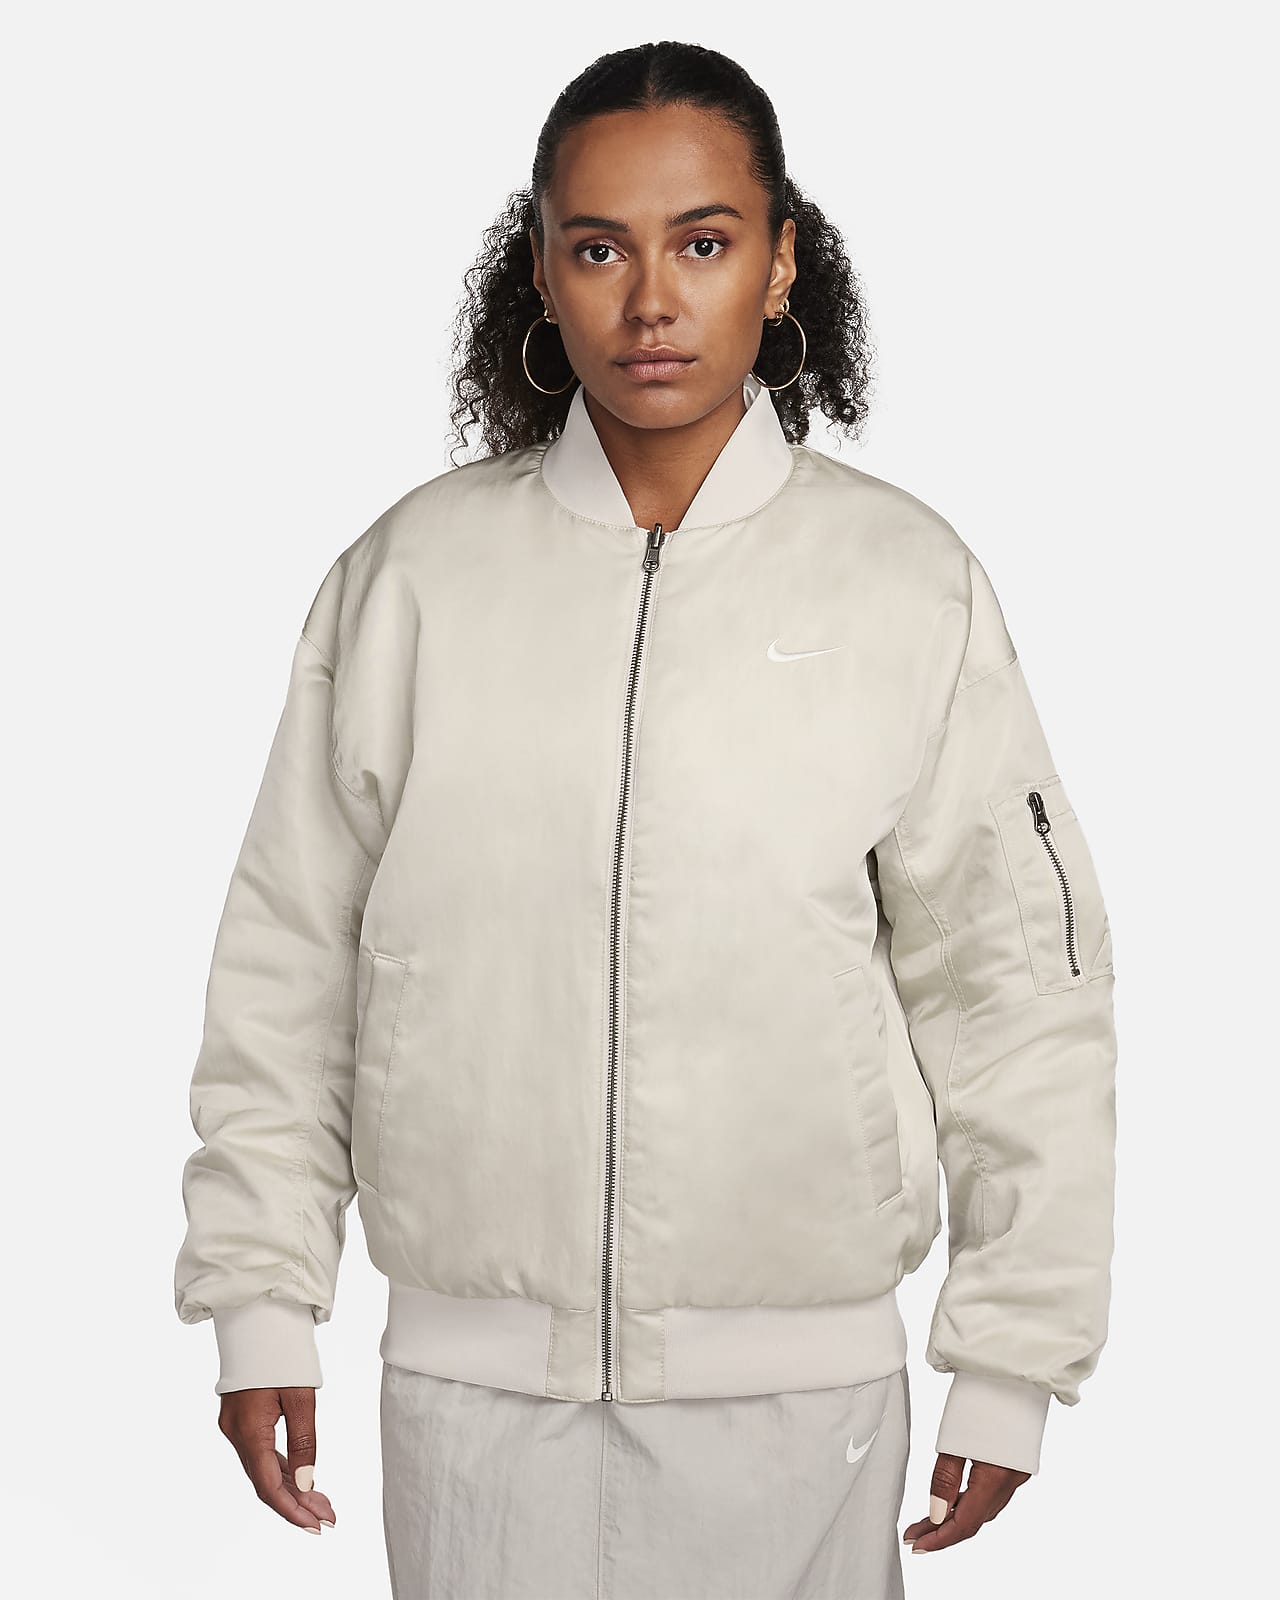 Buy Flying Machine Women Ribbed Stand Collar Solid Bomber Jacket - NNNOW.com-cokhiquangminh.vn